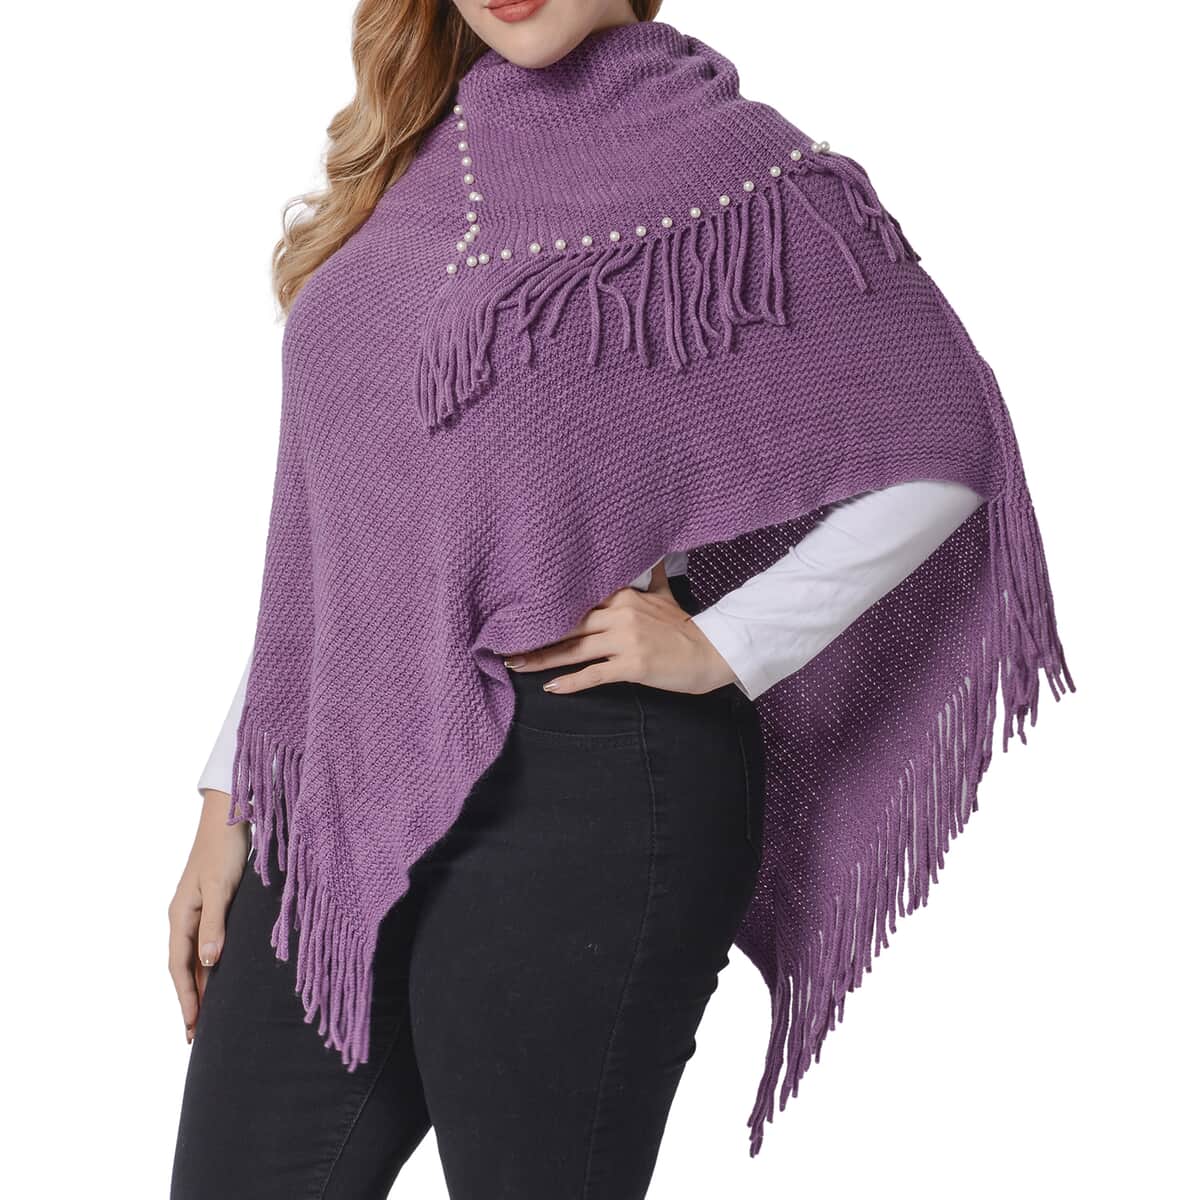 Value Buy Black Cape Neck V-Shape Poncho with Pearls and Fringe Accent (One Size Fits Most, 100% Acrylic) image number 2